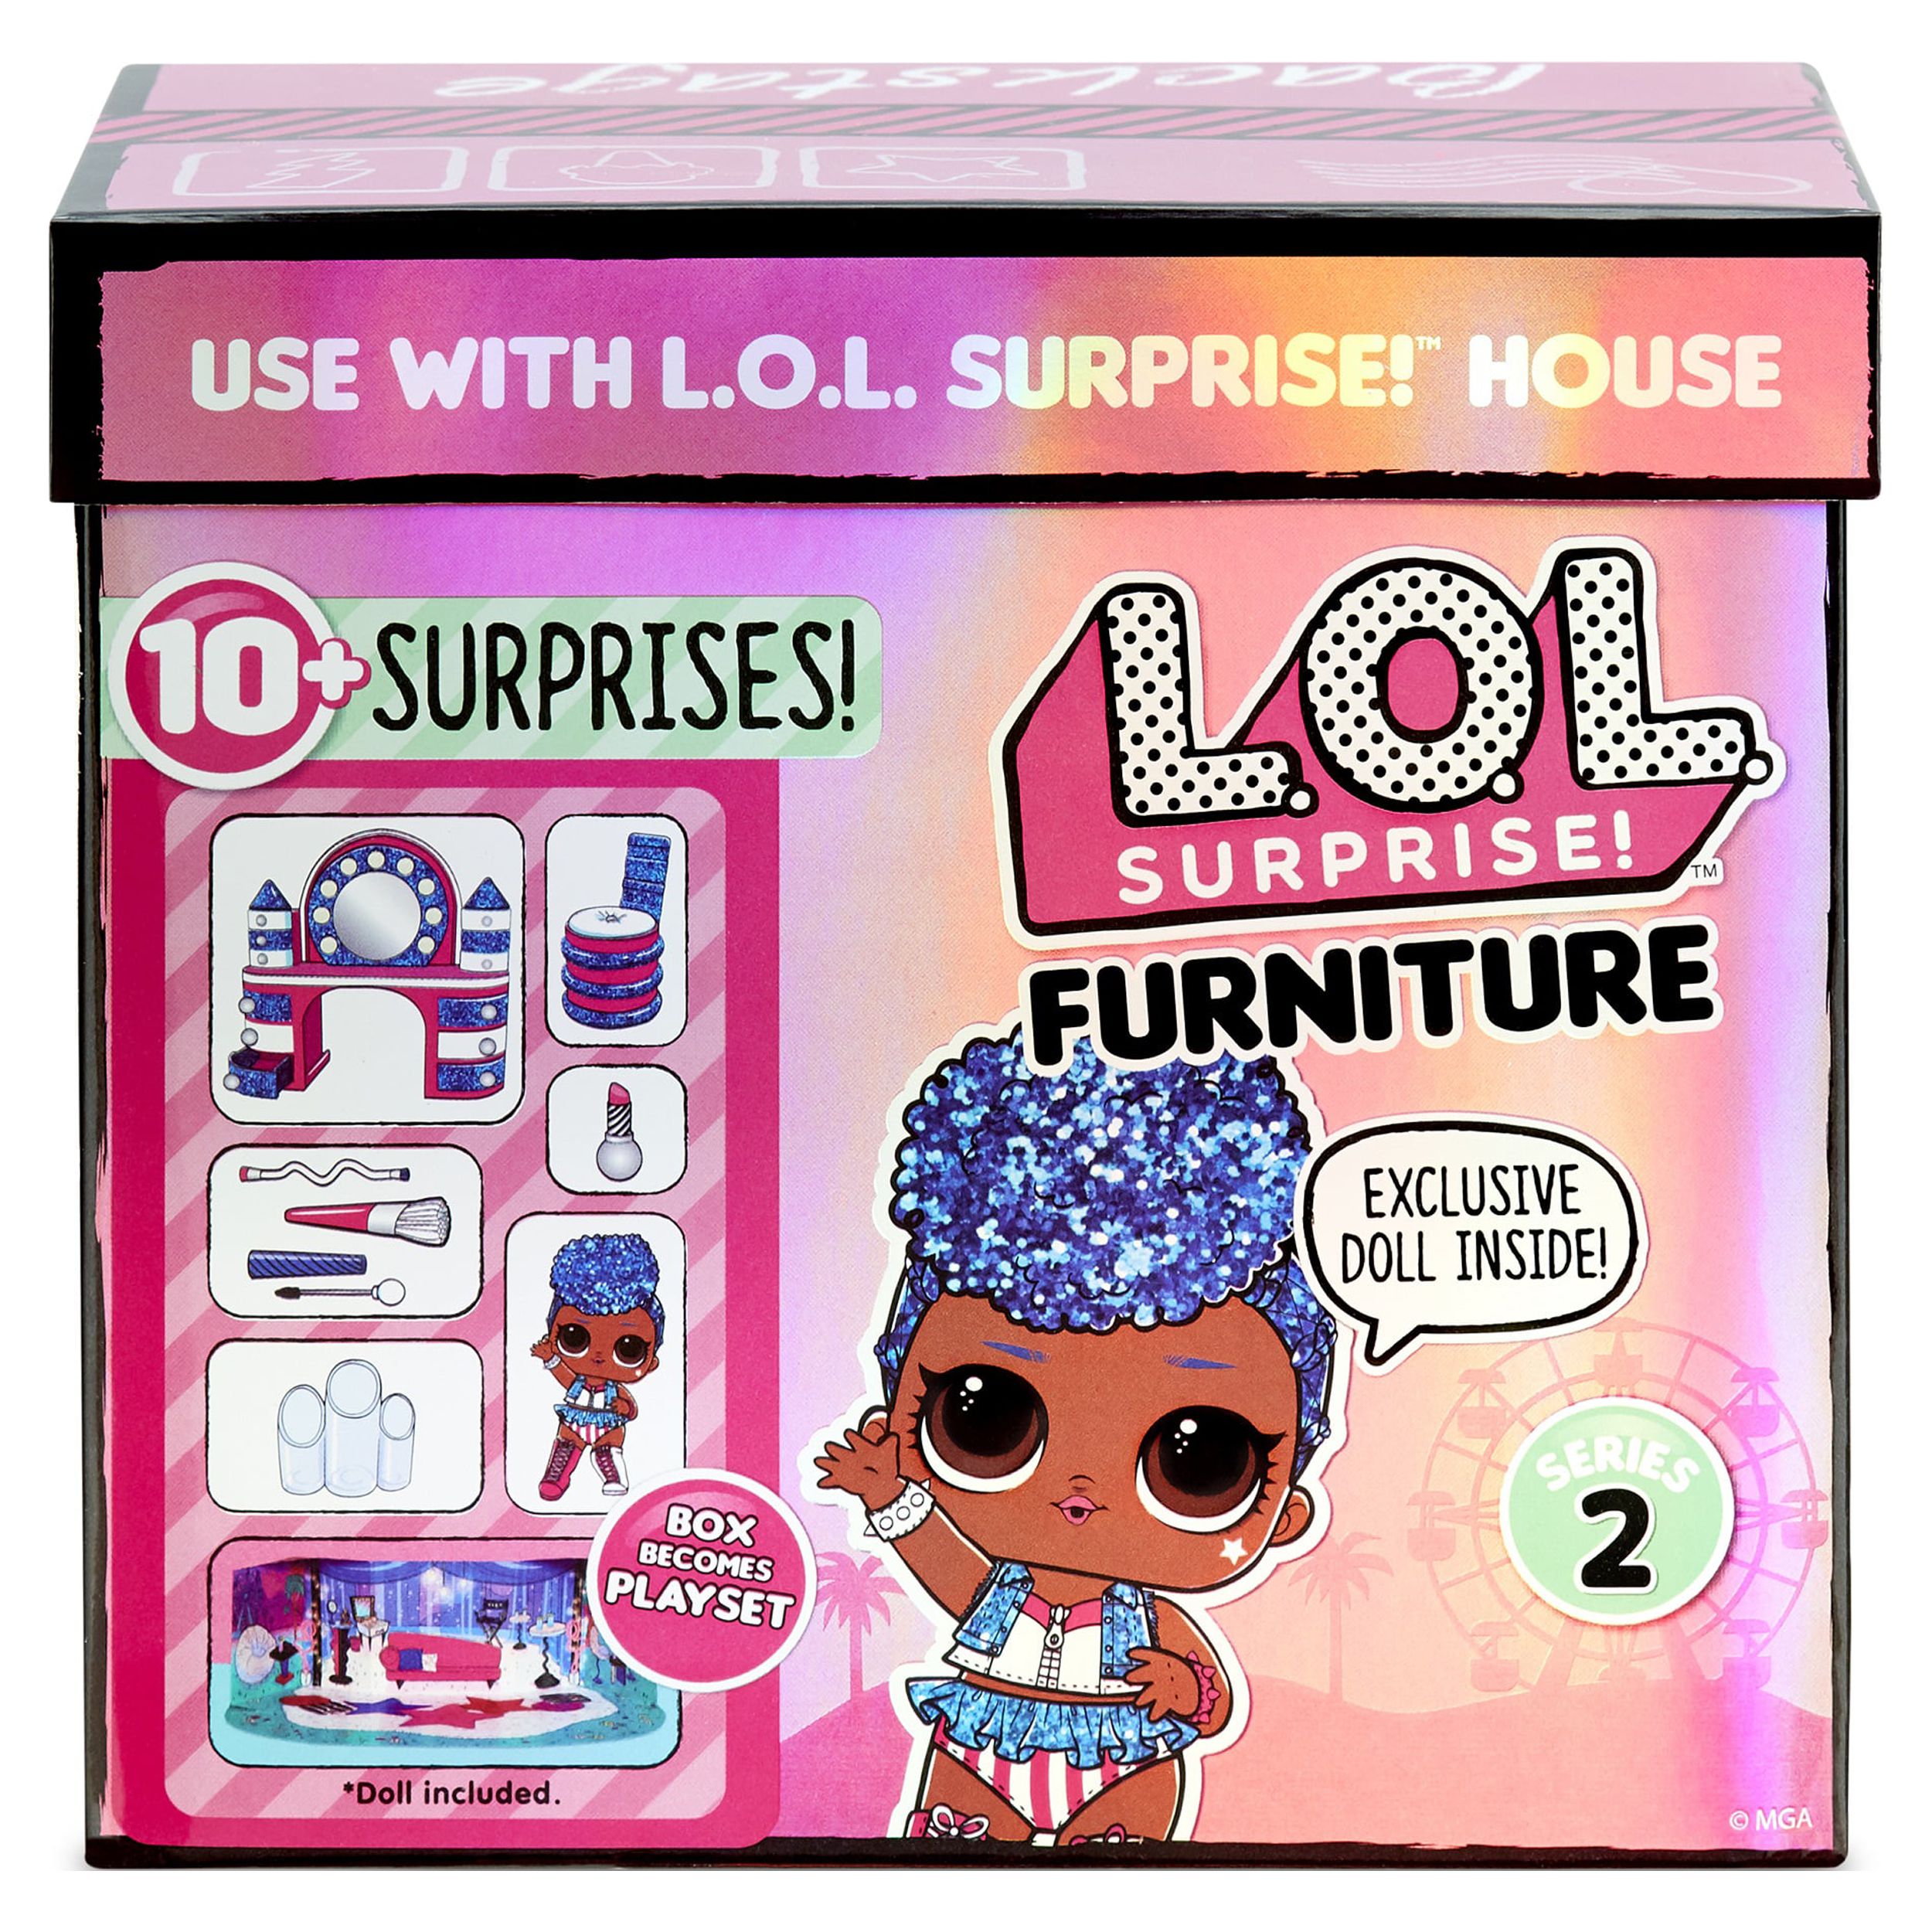 L.O.L. Surprise! Furniture Backstage with Independent Queen & 10+ Surprises - image 5 of 6